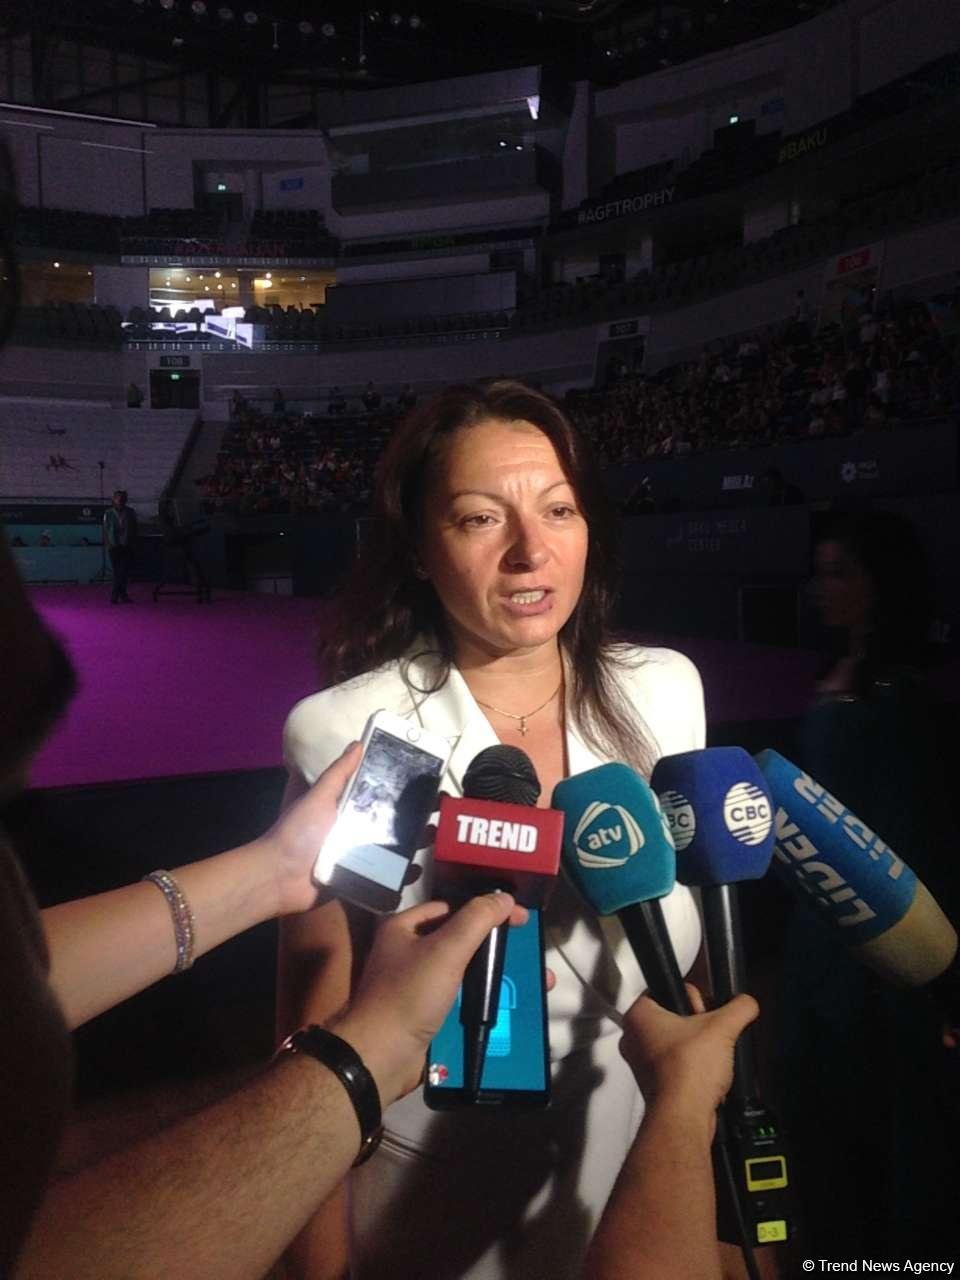 Head coach satisfied with performances of Azerbaijani gymnasts at FIG World Cup